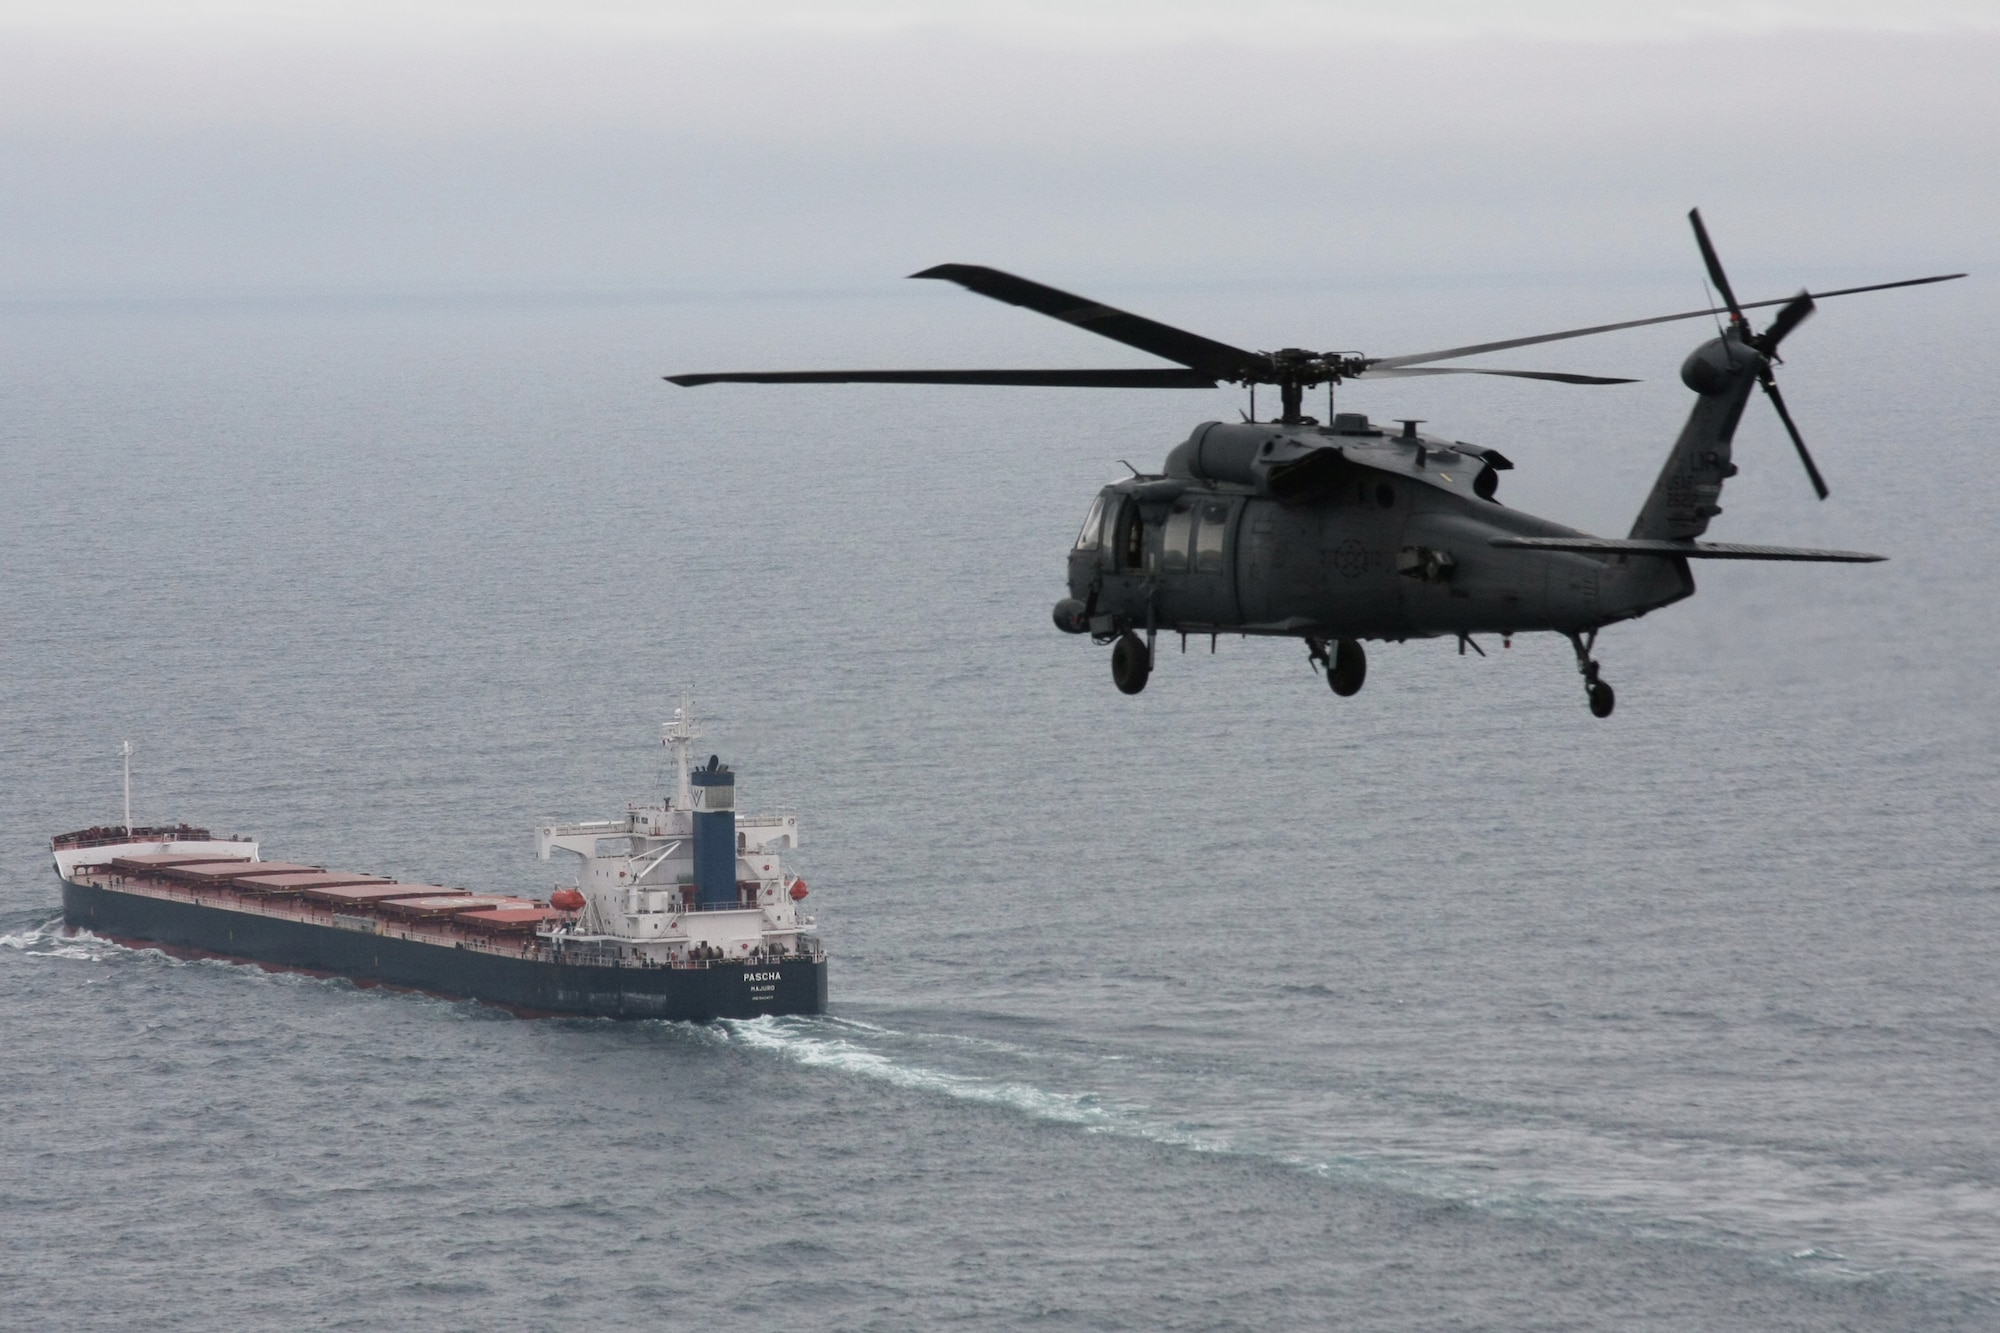 A 56th Rescue Squadron HH-60G Pave Hawk from RAF Lakenheath, England, flies toward the cargo ship Pascha, approximately 400 miles off of the West coast of Ireland, June 26. Two helicopters from the squadron made the journey to save a sailor who was experiencing severe abdominal pain and required immediate medical evacuation. Two additional U.S. Air Force aircraft, a KC-135R Stratotanker from the 100th Air Refueling Wing and a MC-130P Combat Shadow from the 352nd Special Operations Group -- both from nearby RAF Mildenhall -- supported the operation for refueling and communication purposes. A Nimrod, search and rescue aircraft, from the United Kingdom also played a critical role in the operation, providing real time communication and coordination between the ship and USAF aircraft. The patient was delivered to an awaiting ambulance in Shannon, Ireland, and is in stable condition. (U.S. Air Force photo/Master Sgt. Jay Reinschi.)